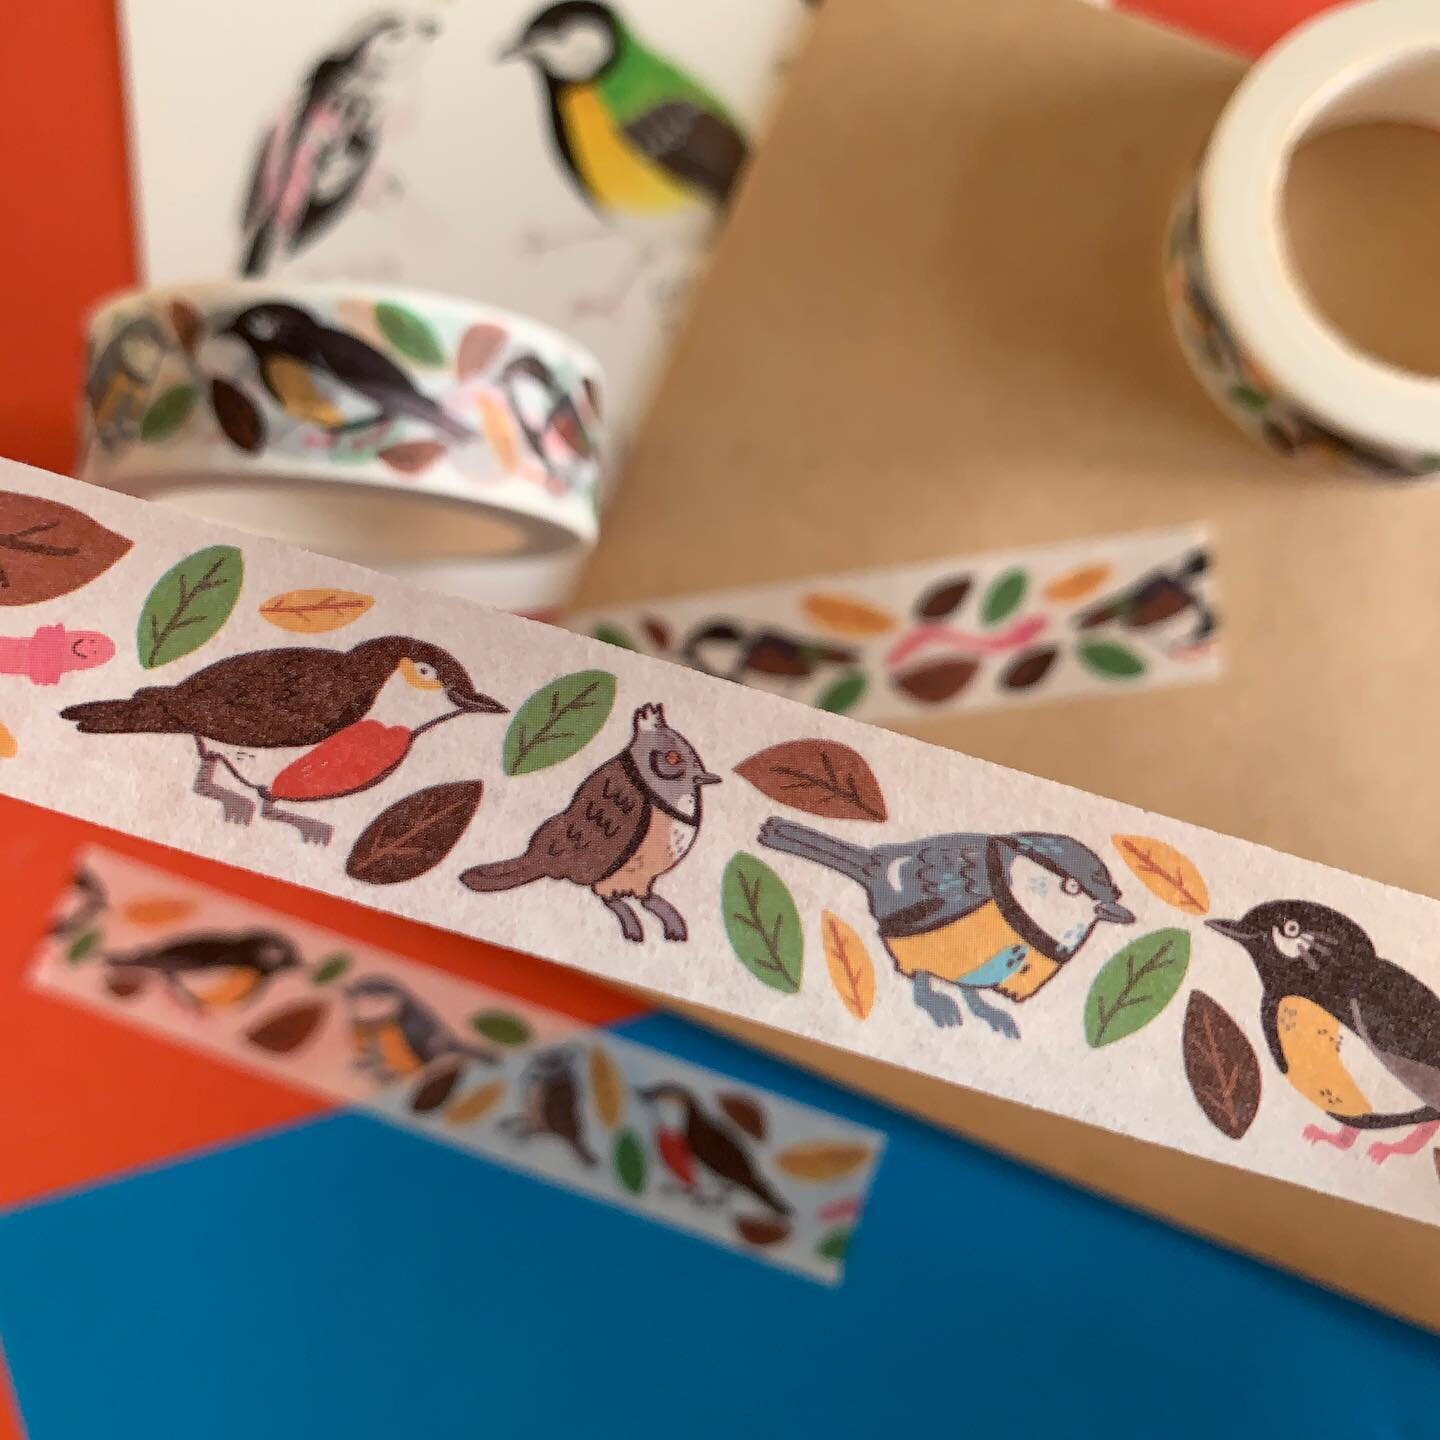 Roll up! Roll up! ✨ TIT TAPE ✨ the washi tape you didn&rsquo;t know you needed is now available on my Etsy! 🍂🐦🪱🦜🪶🍃 Some cute little bird boys with a sneaky worm on a leafy background. Decorate your journals, stick don&rsquo;t lick your envelope